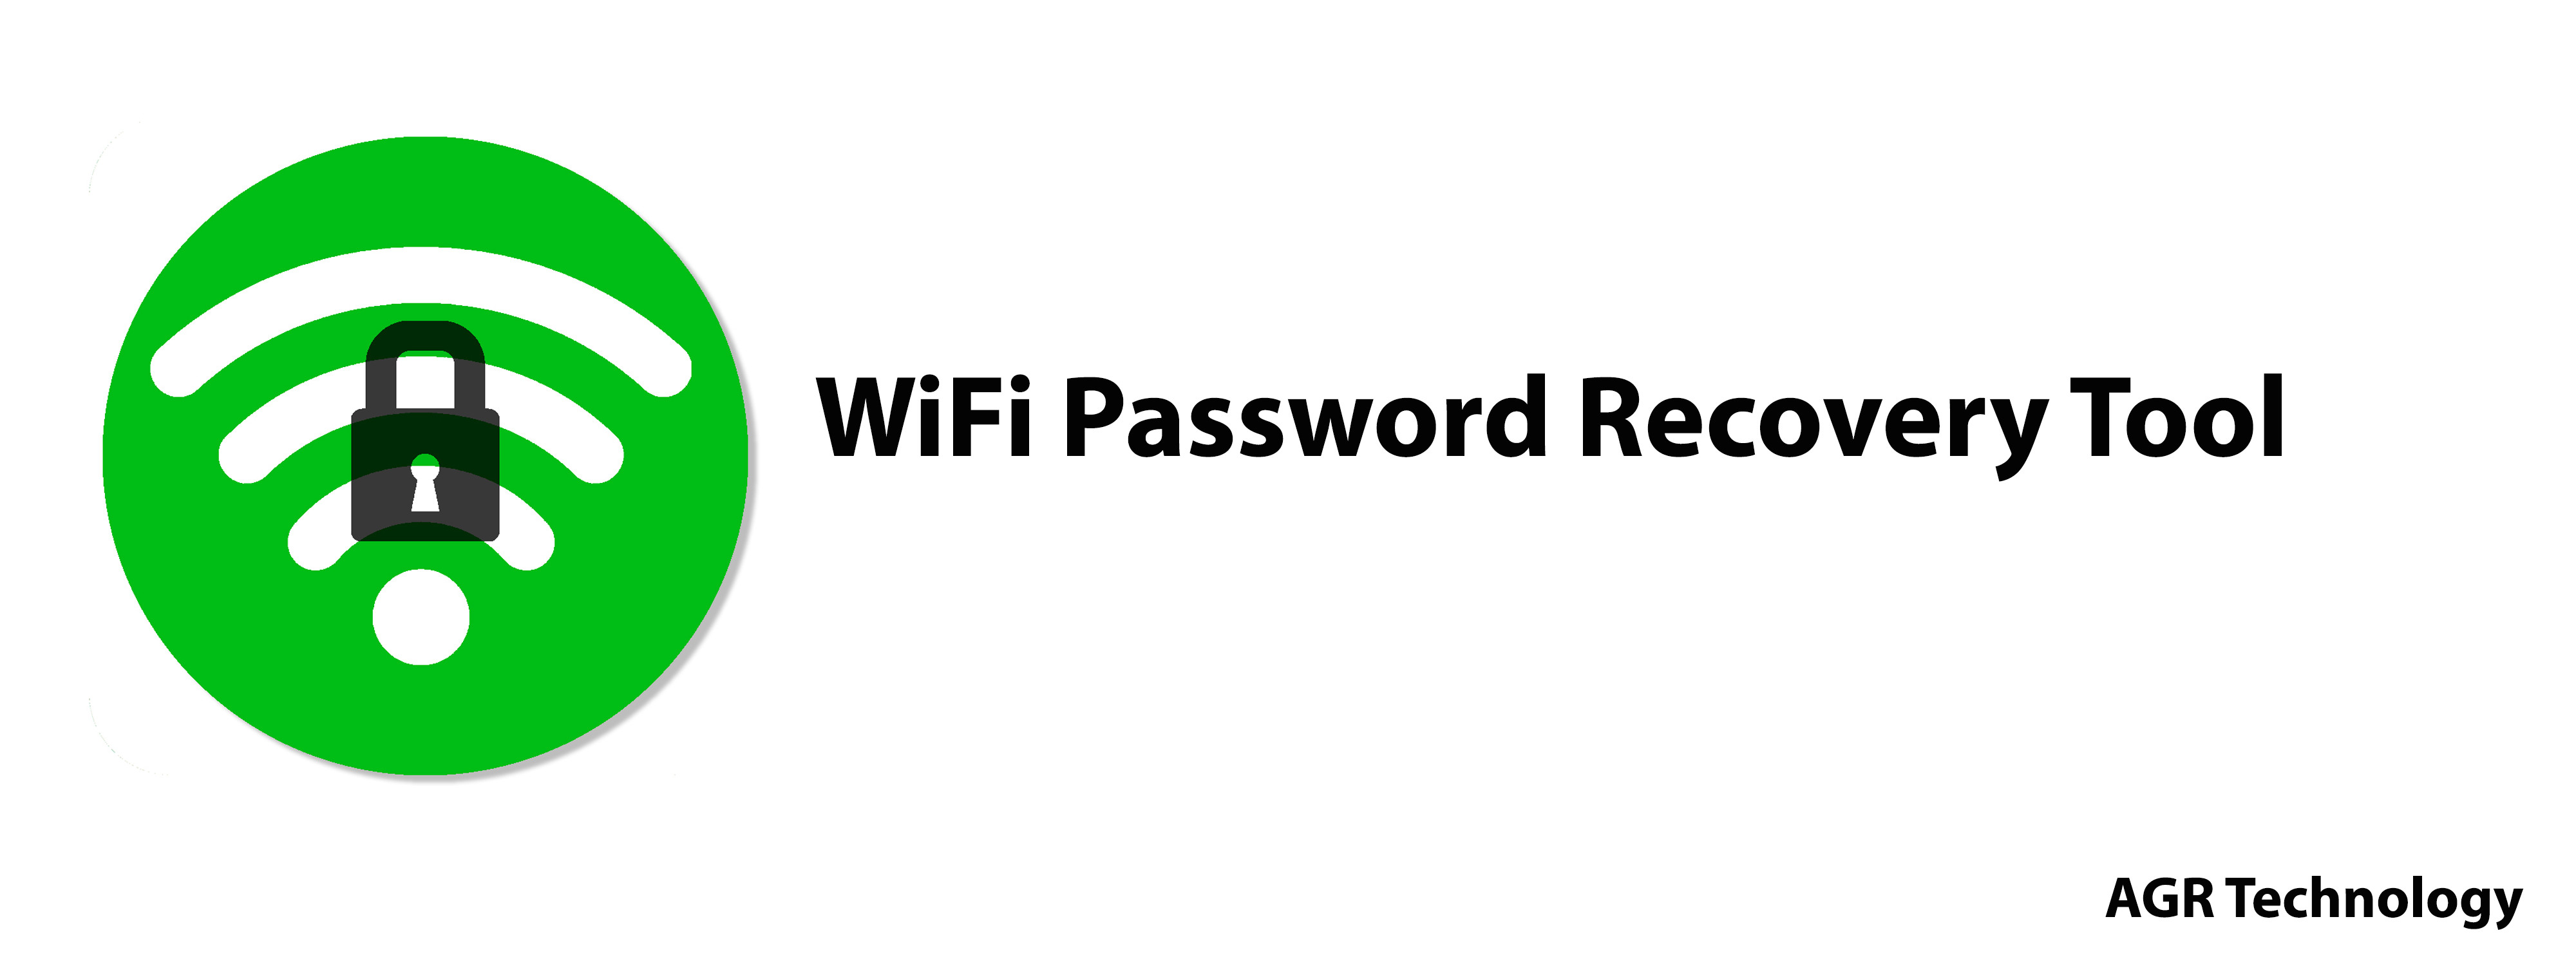 wifipasswordtool-by-agrtech